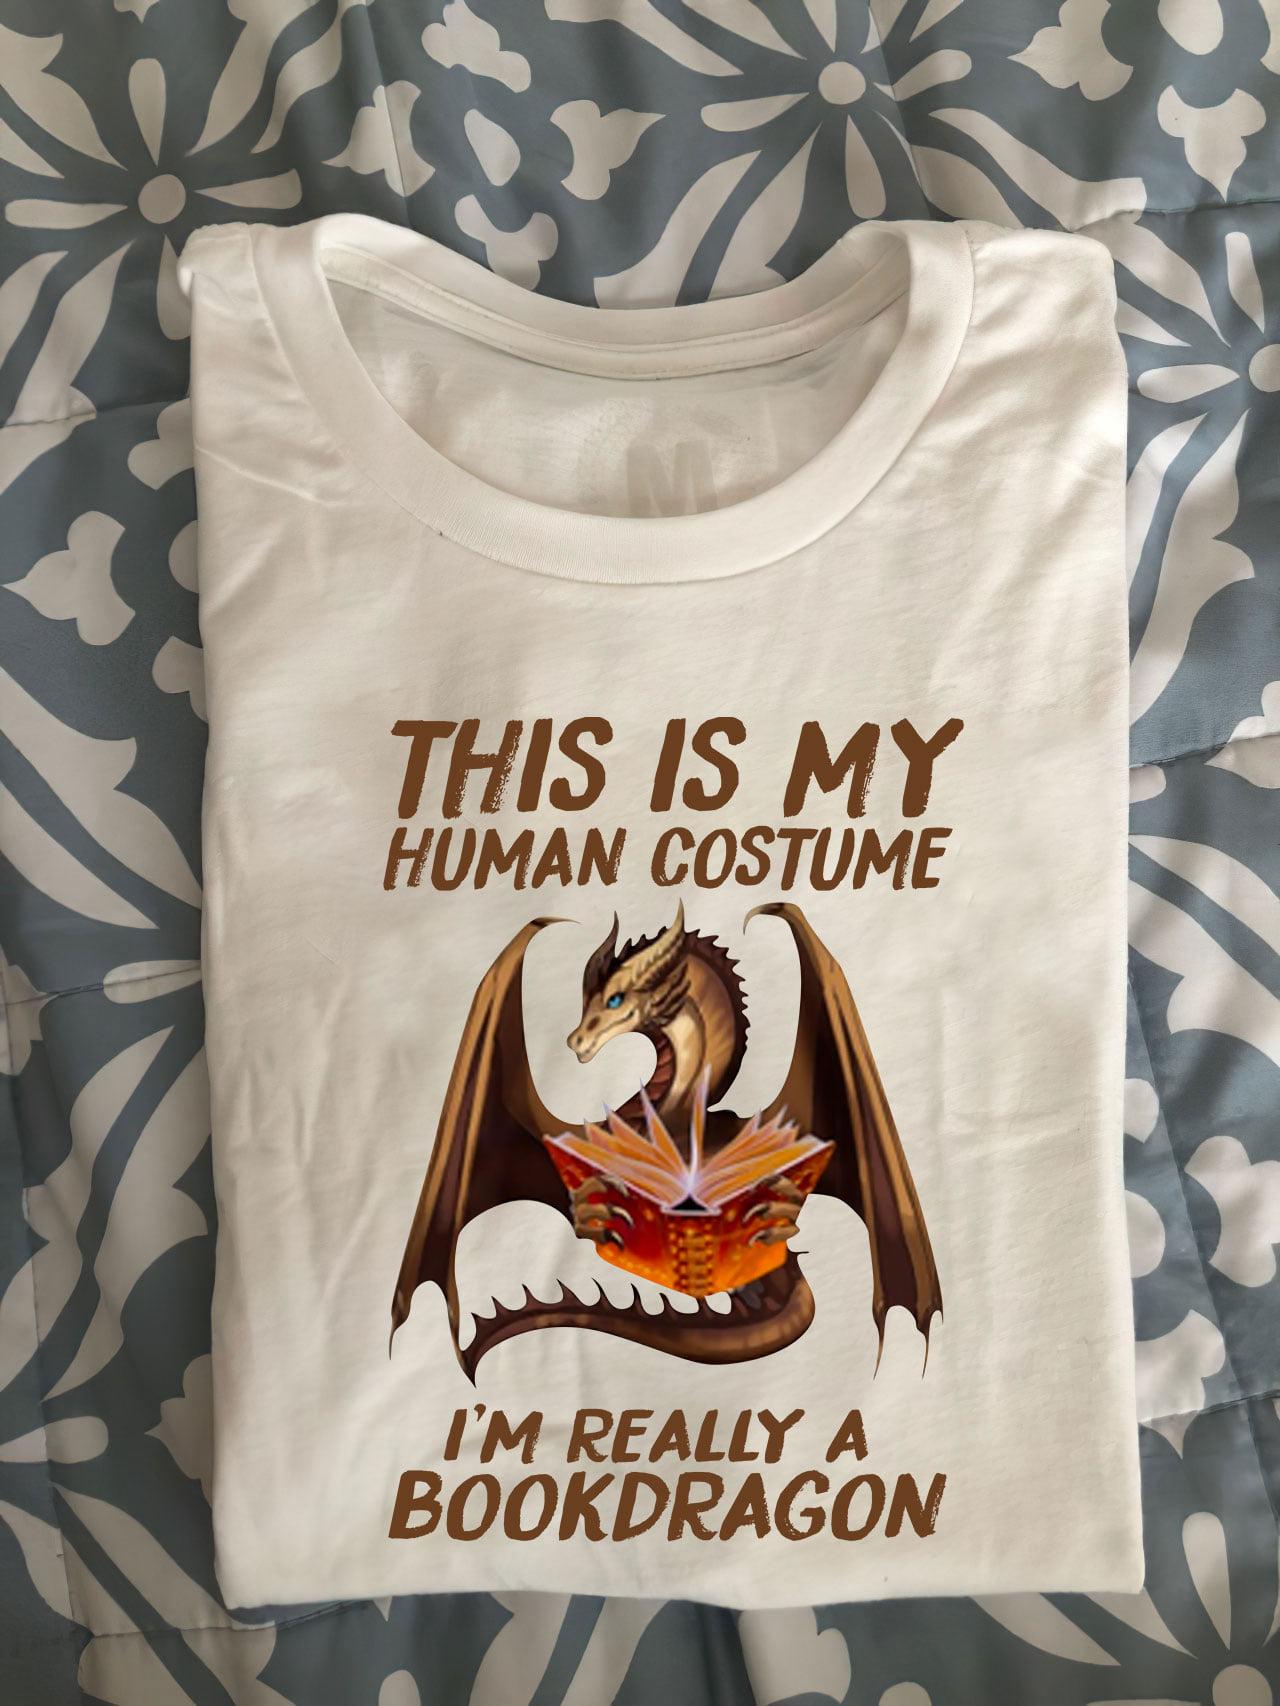 This is my human costume I'm really a bookdragon - Dragon reading book, gift for book reader